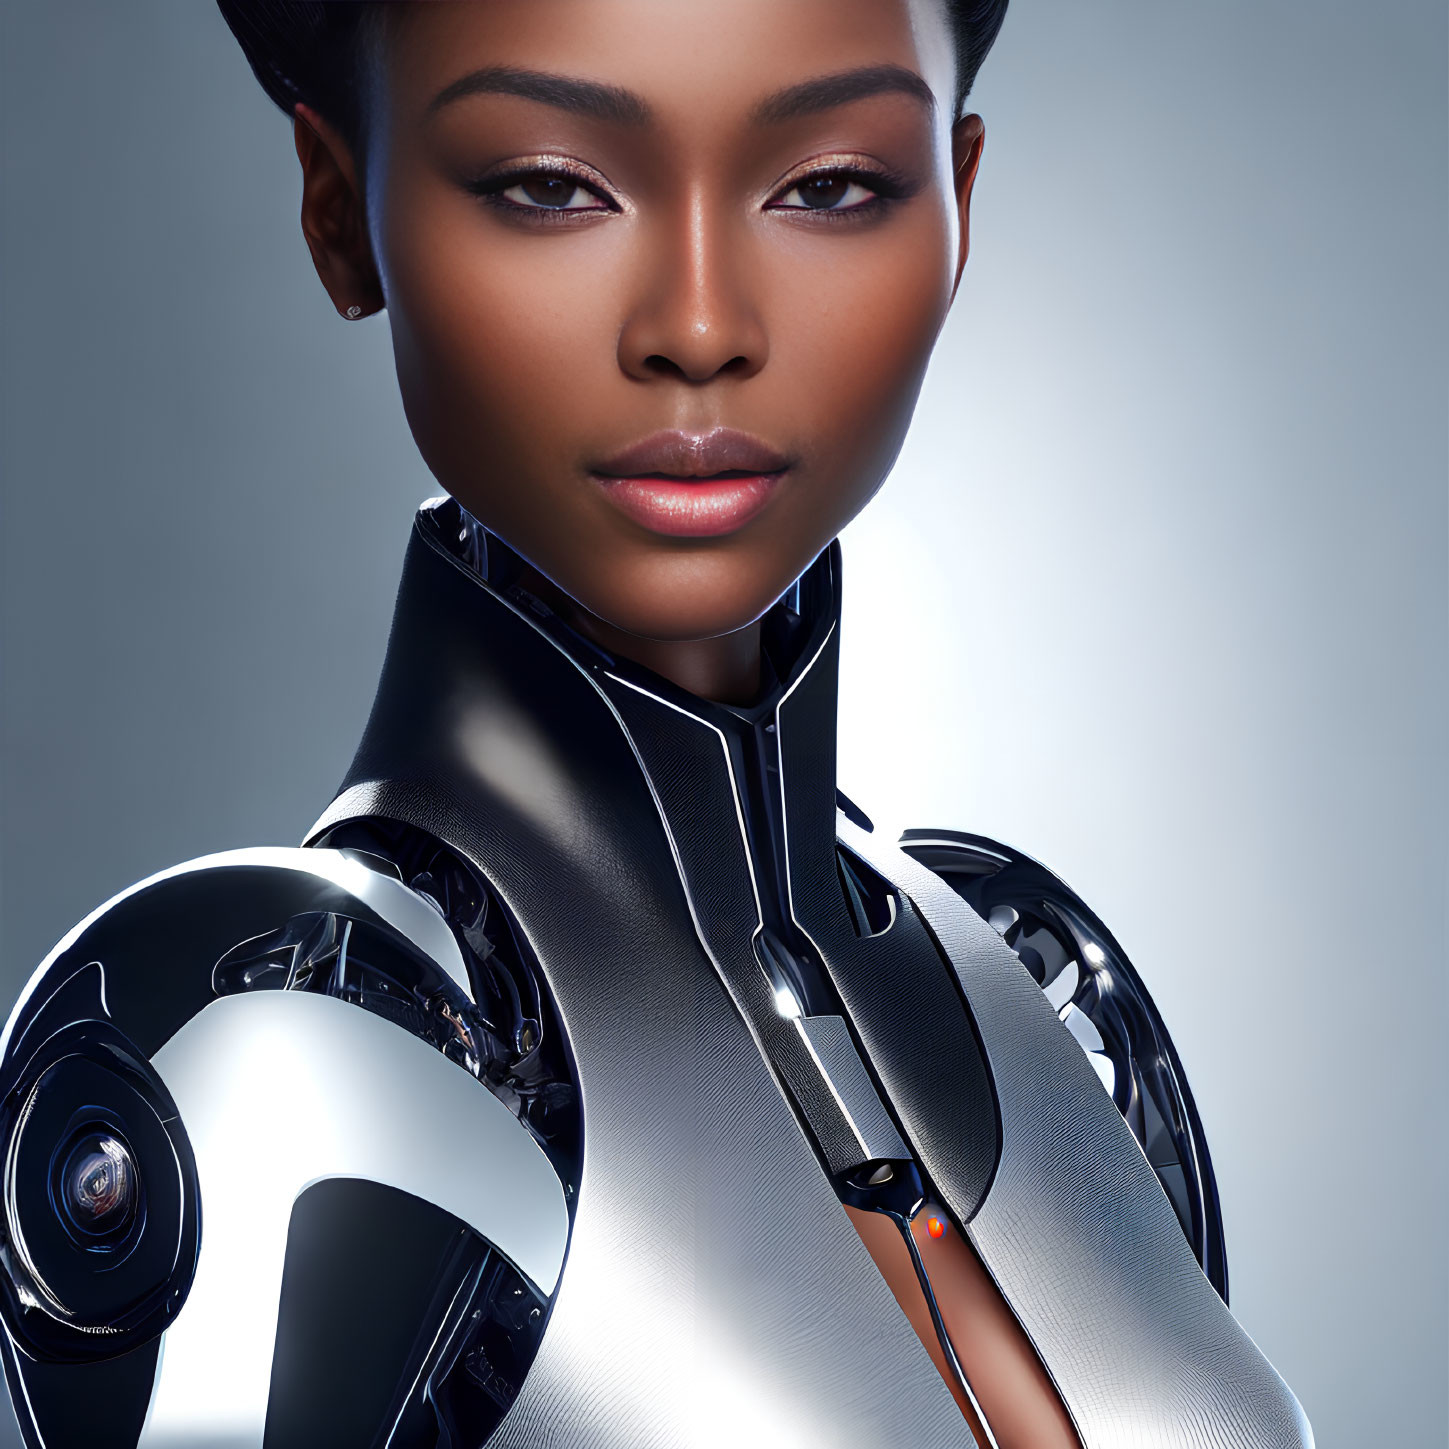 Photorealistic African woman depicted as cyborg with futuristic elements